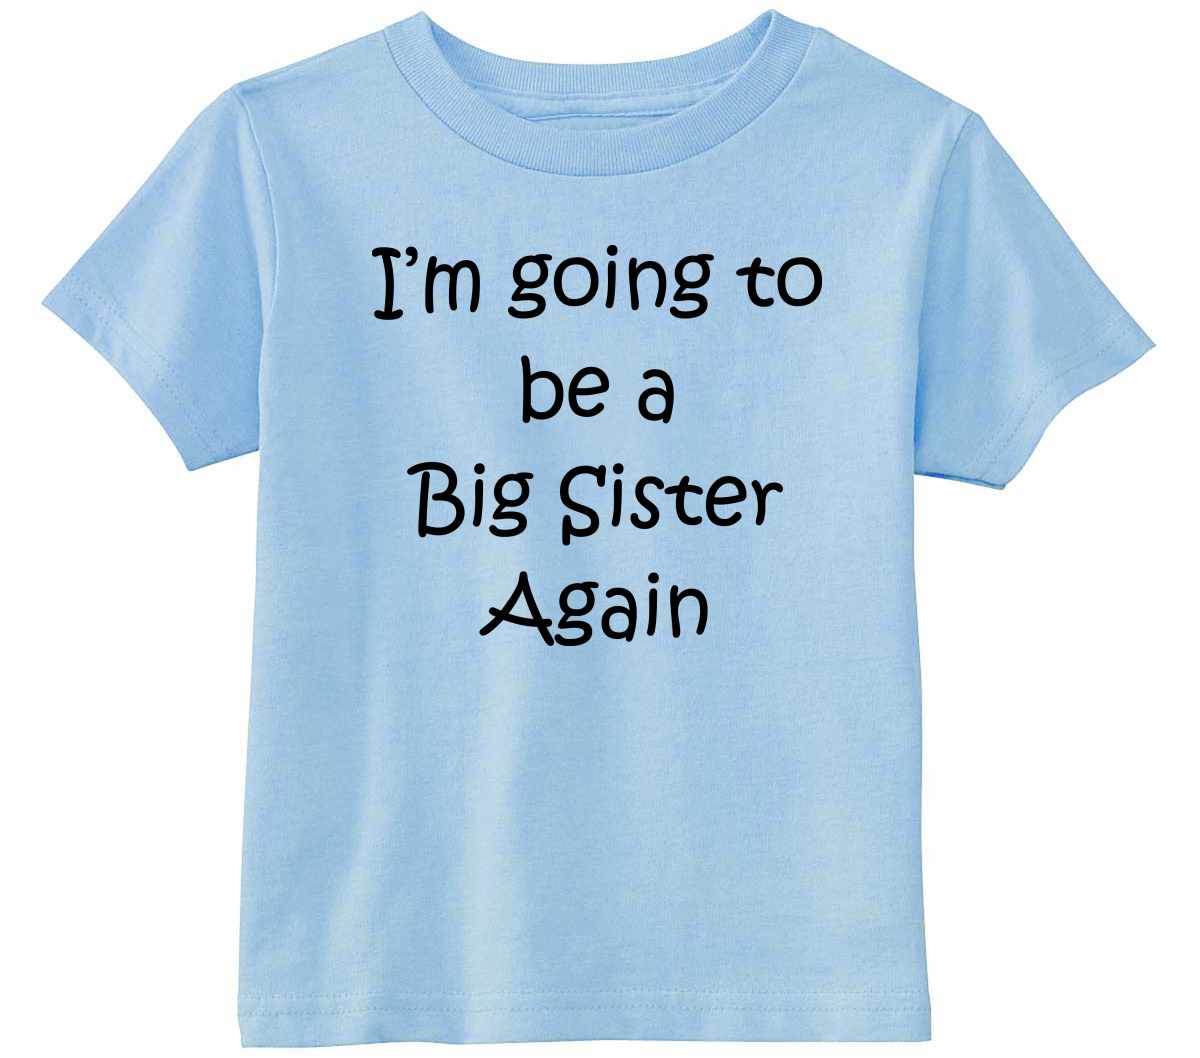 I'm Going to be a Big Sister Again Infant/Toddler  (#814-7)